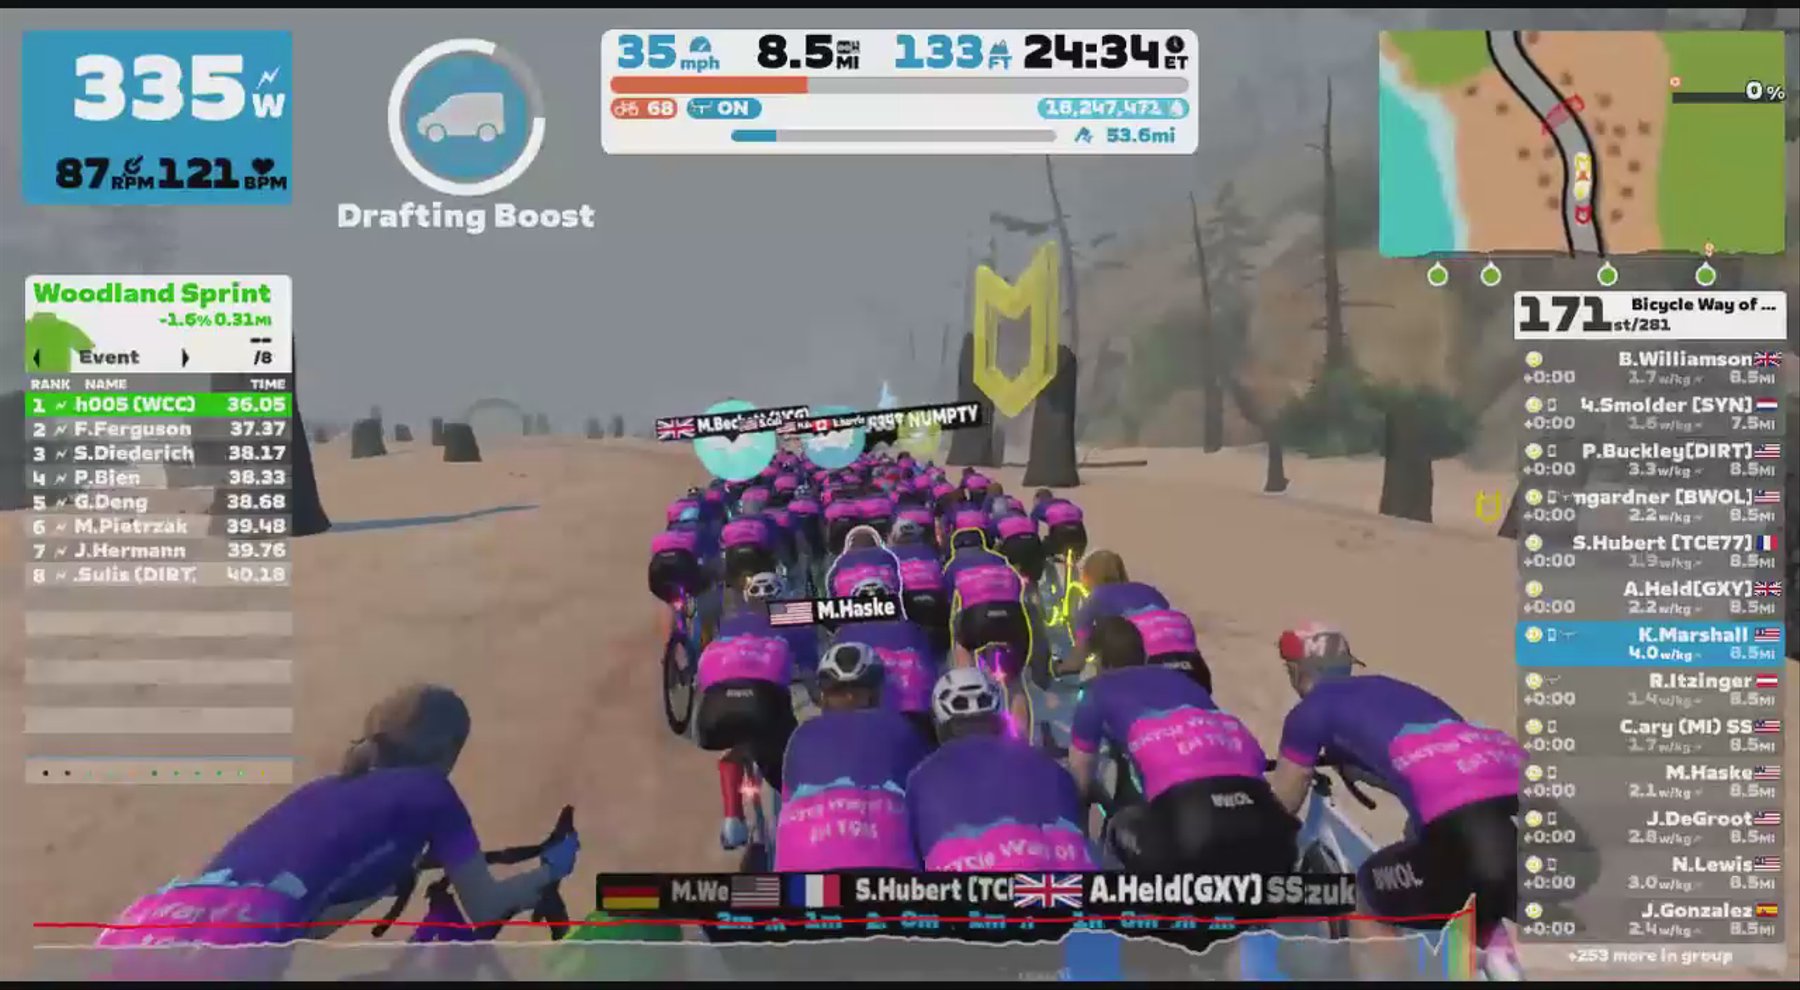 Zwift - Group Ride: Bicycle Way of Life Saturday Ride (D) on The Big Ring in Watopia